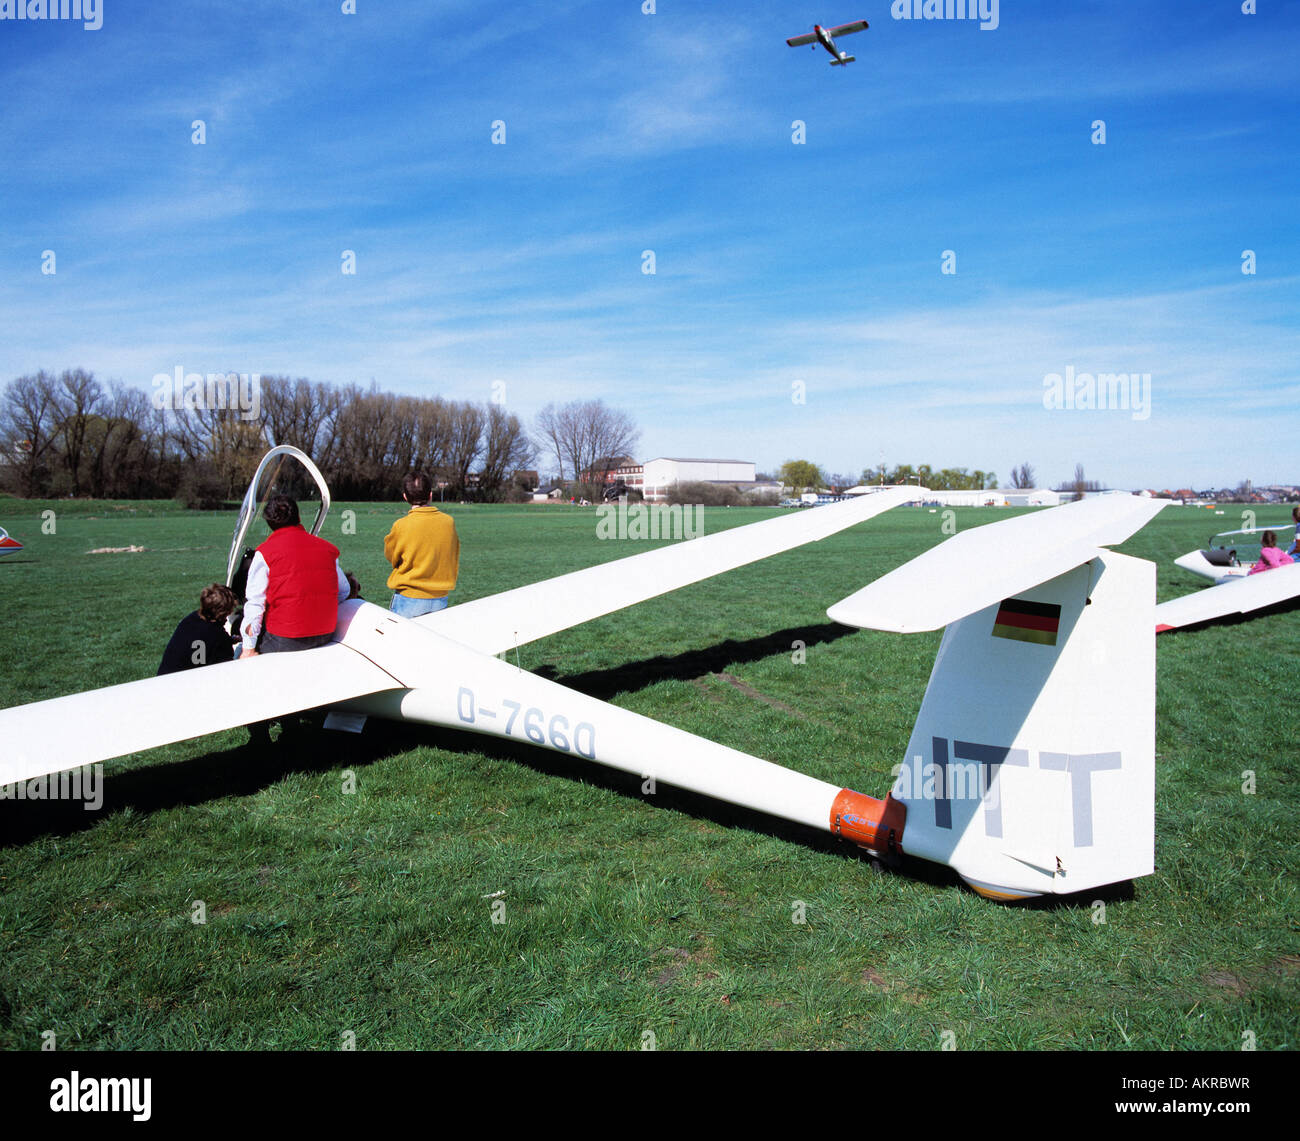 D-Hamm, Ruhr area, North Rhine-Westphalia, gliding field, glider on the ground, starting glider, glider will be pulled up to the sky by cable, gliding, glider, glider flight, air traffic, airplane, traffic, travel, free time, leisure-time activity Stock Photo